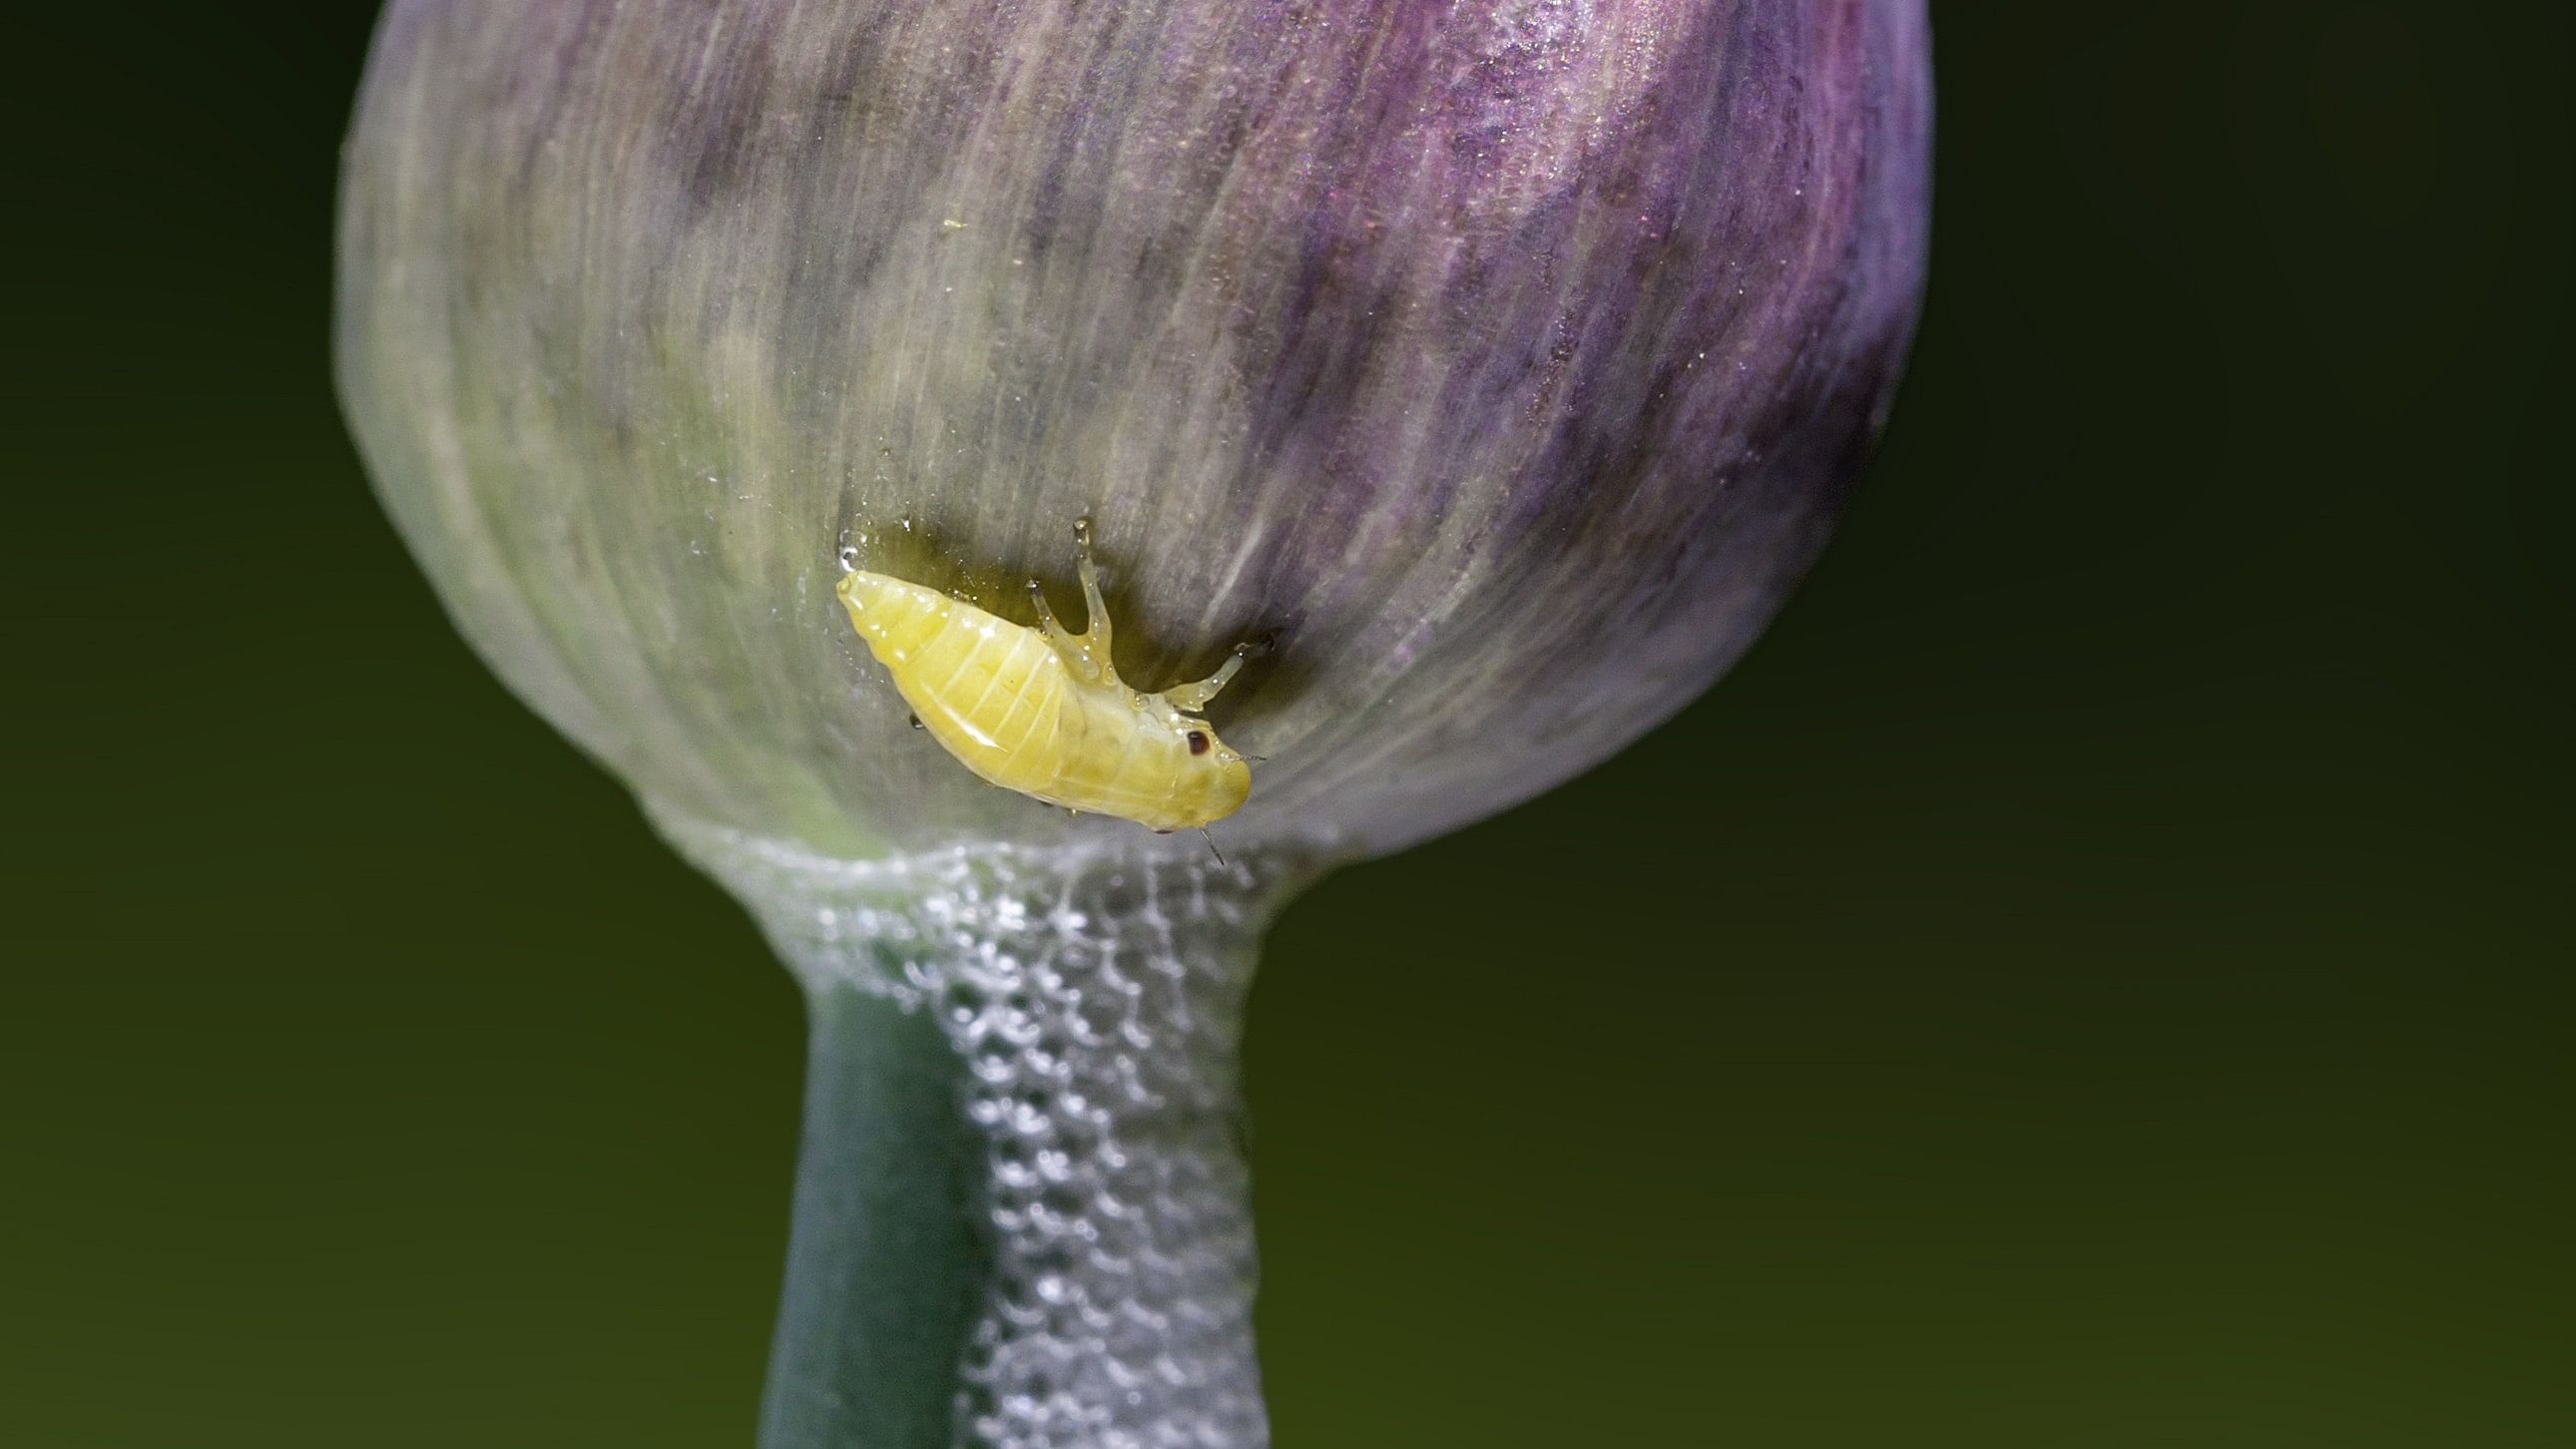 Froghopper nymph and its foamy abode on a chive plant
